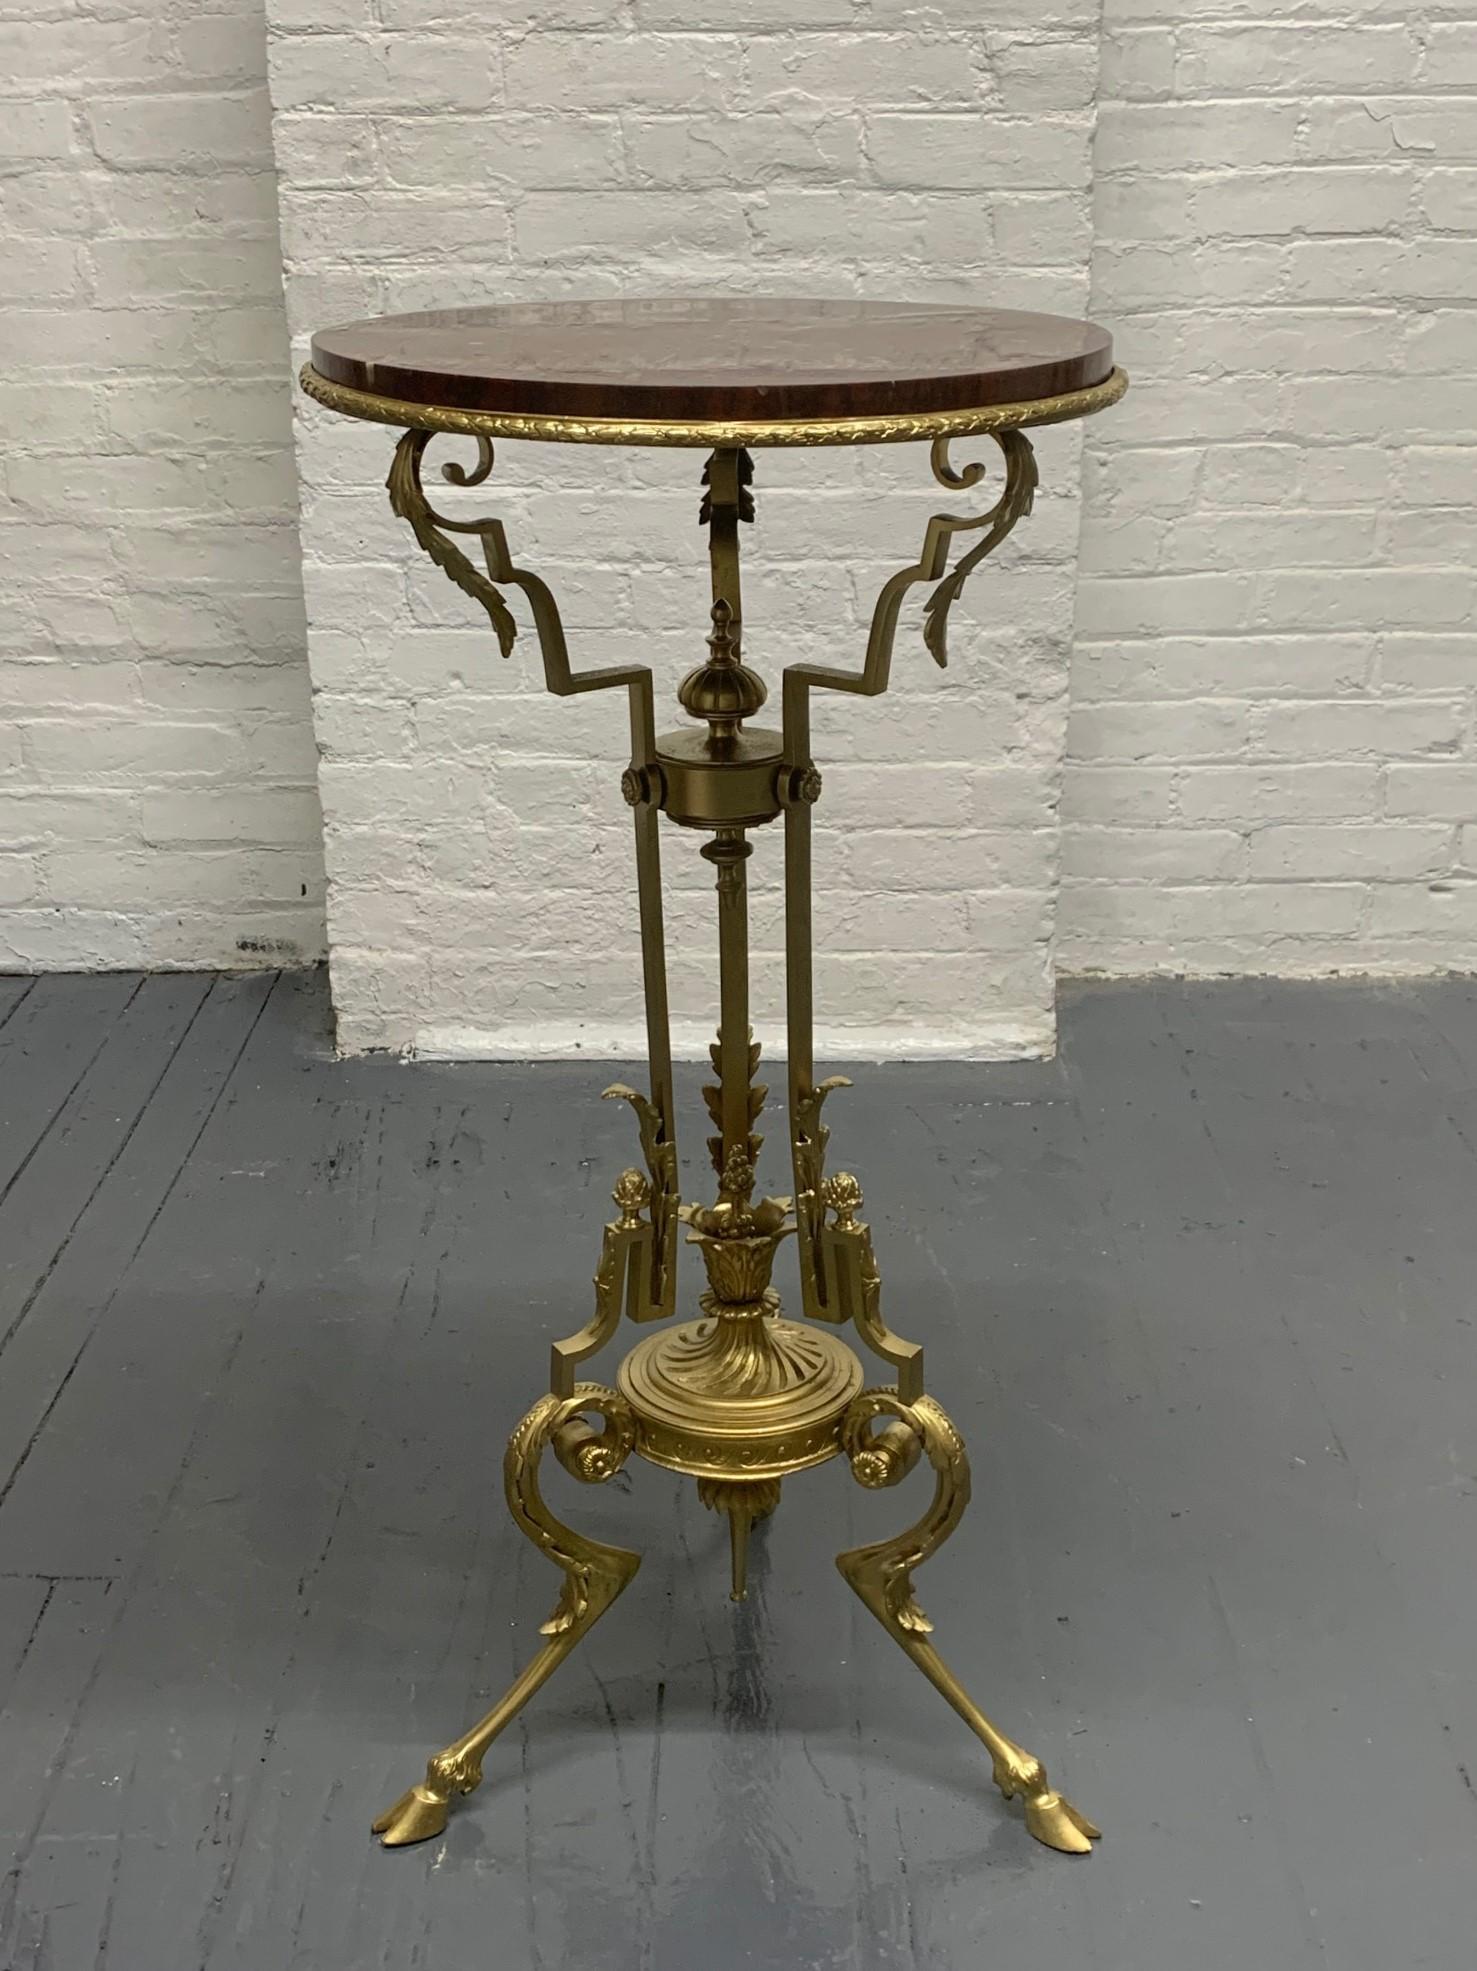 1920s French bronze and marble pedestal. Pedestal has hoof feet, a nice burgundy marble top with a decorative and ornate bronze frame.